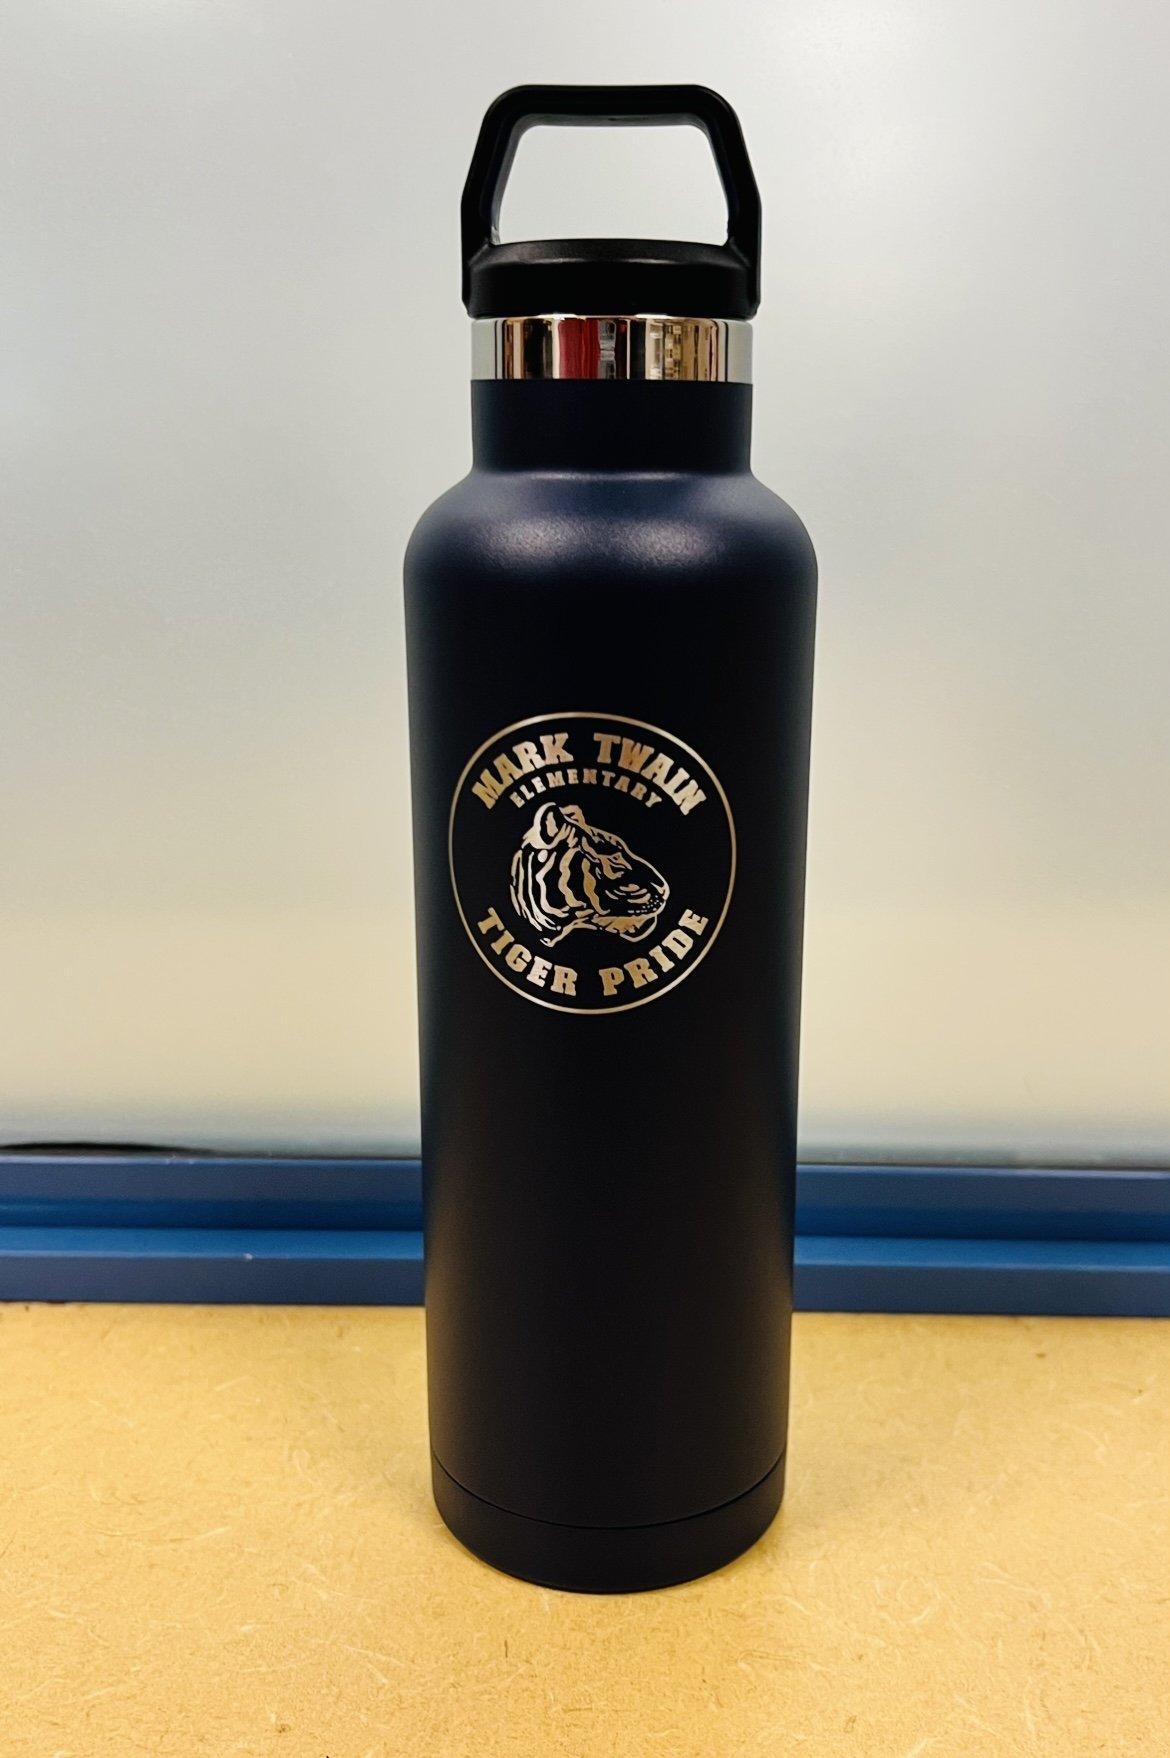 Pride Circle Ohio Stainless Steel Water Bottle